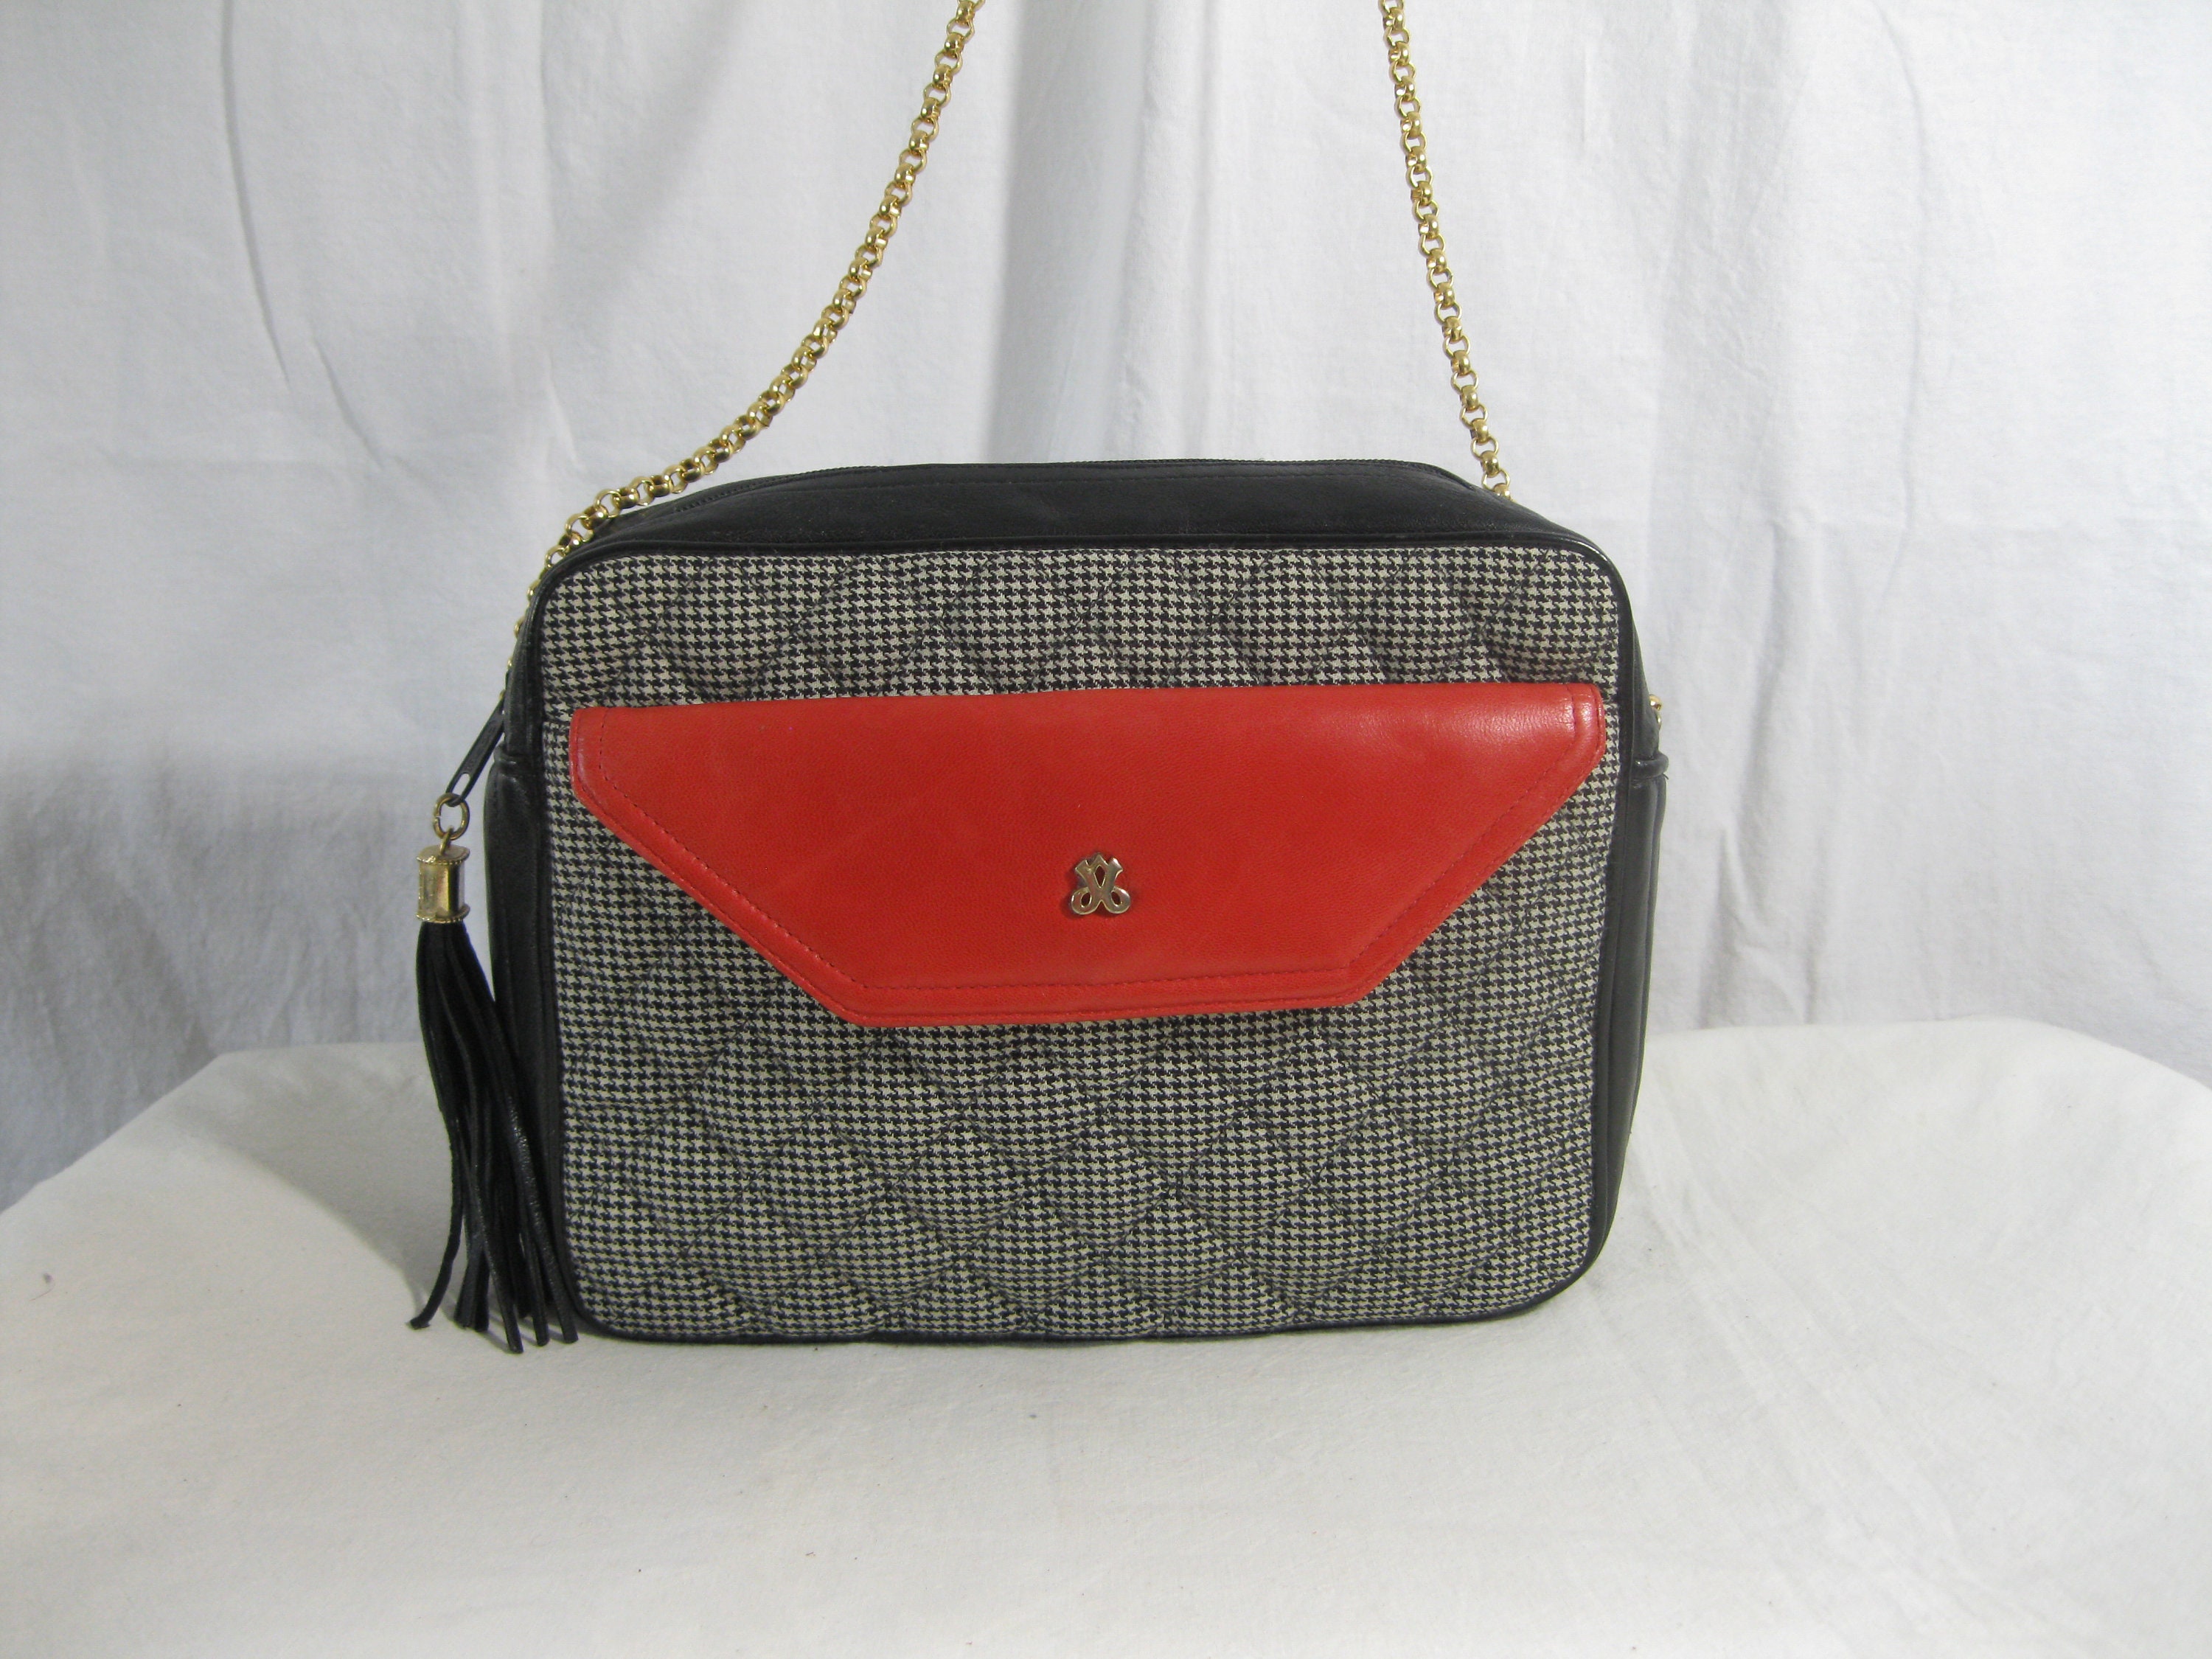 Vintage Jay Herbert Quilted Leather Canvas Chain Link Shoulder Bag with Tassel Cross Body